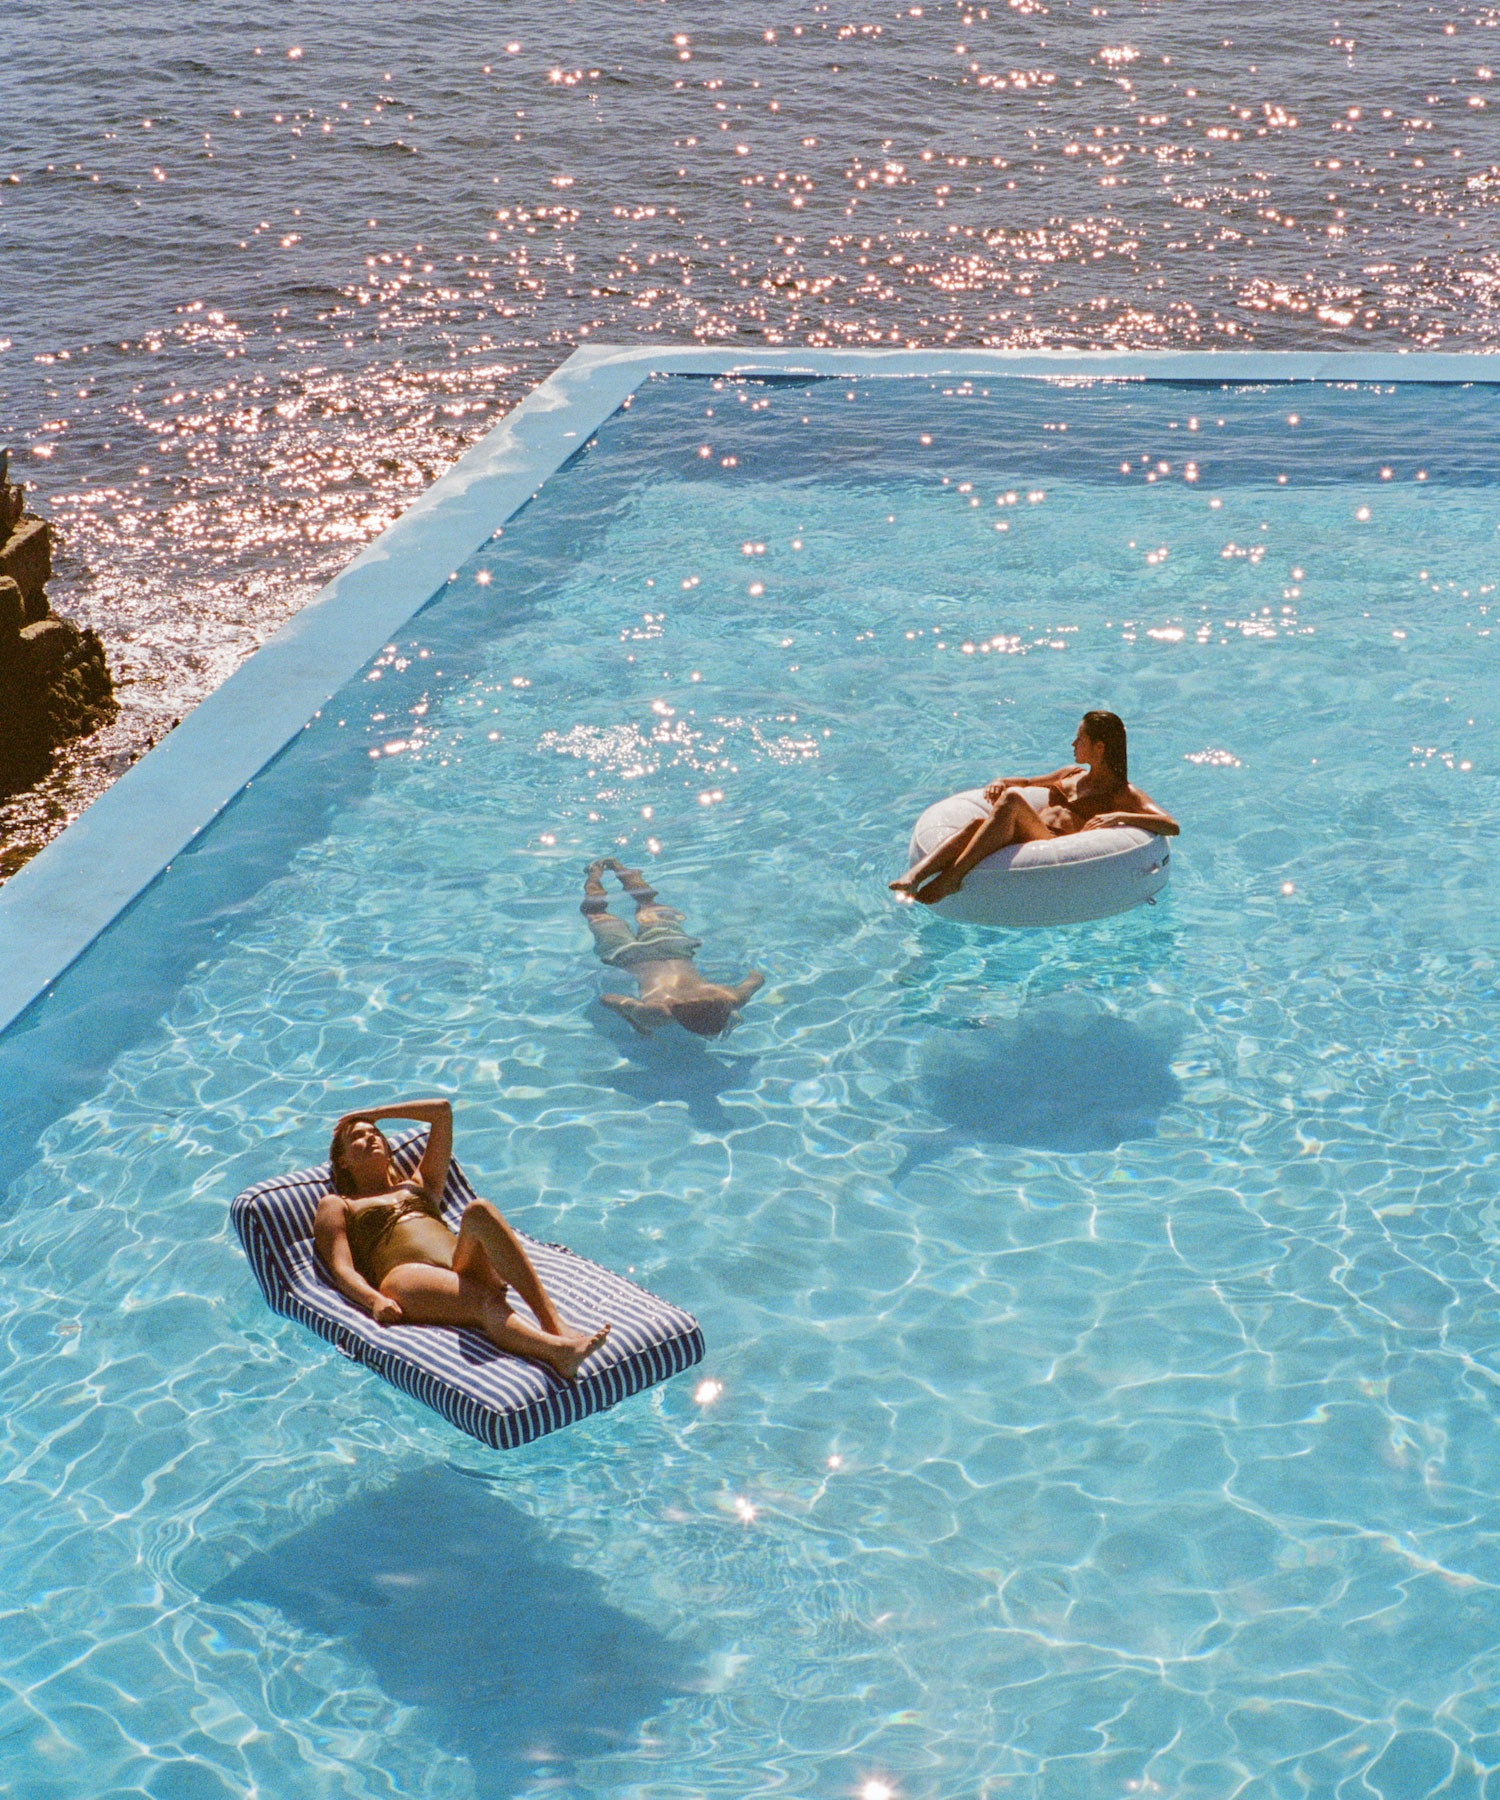 Two adults on pool floats for adults in a swimming pool overlooking the ocean with a man swimming beneath them underwater. 